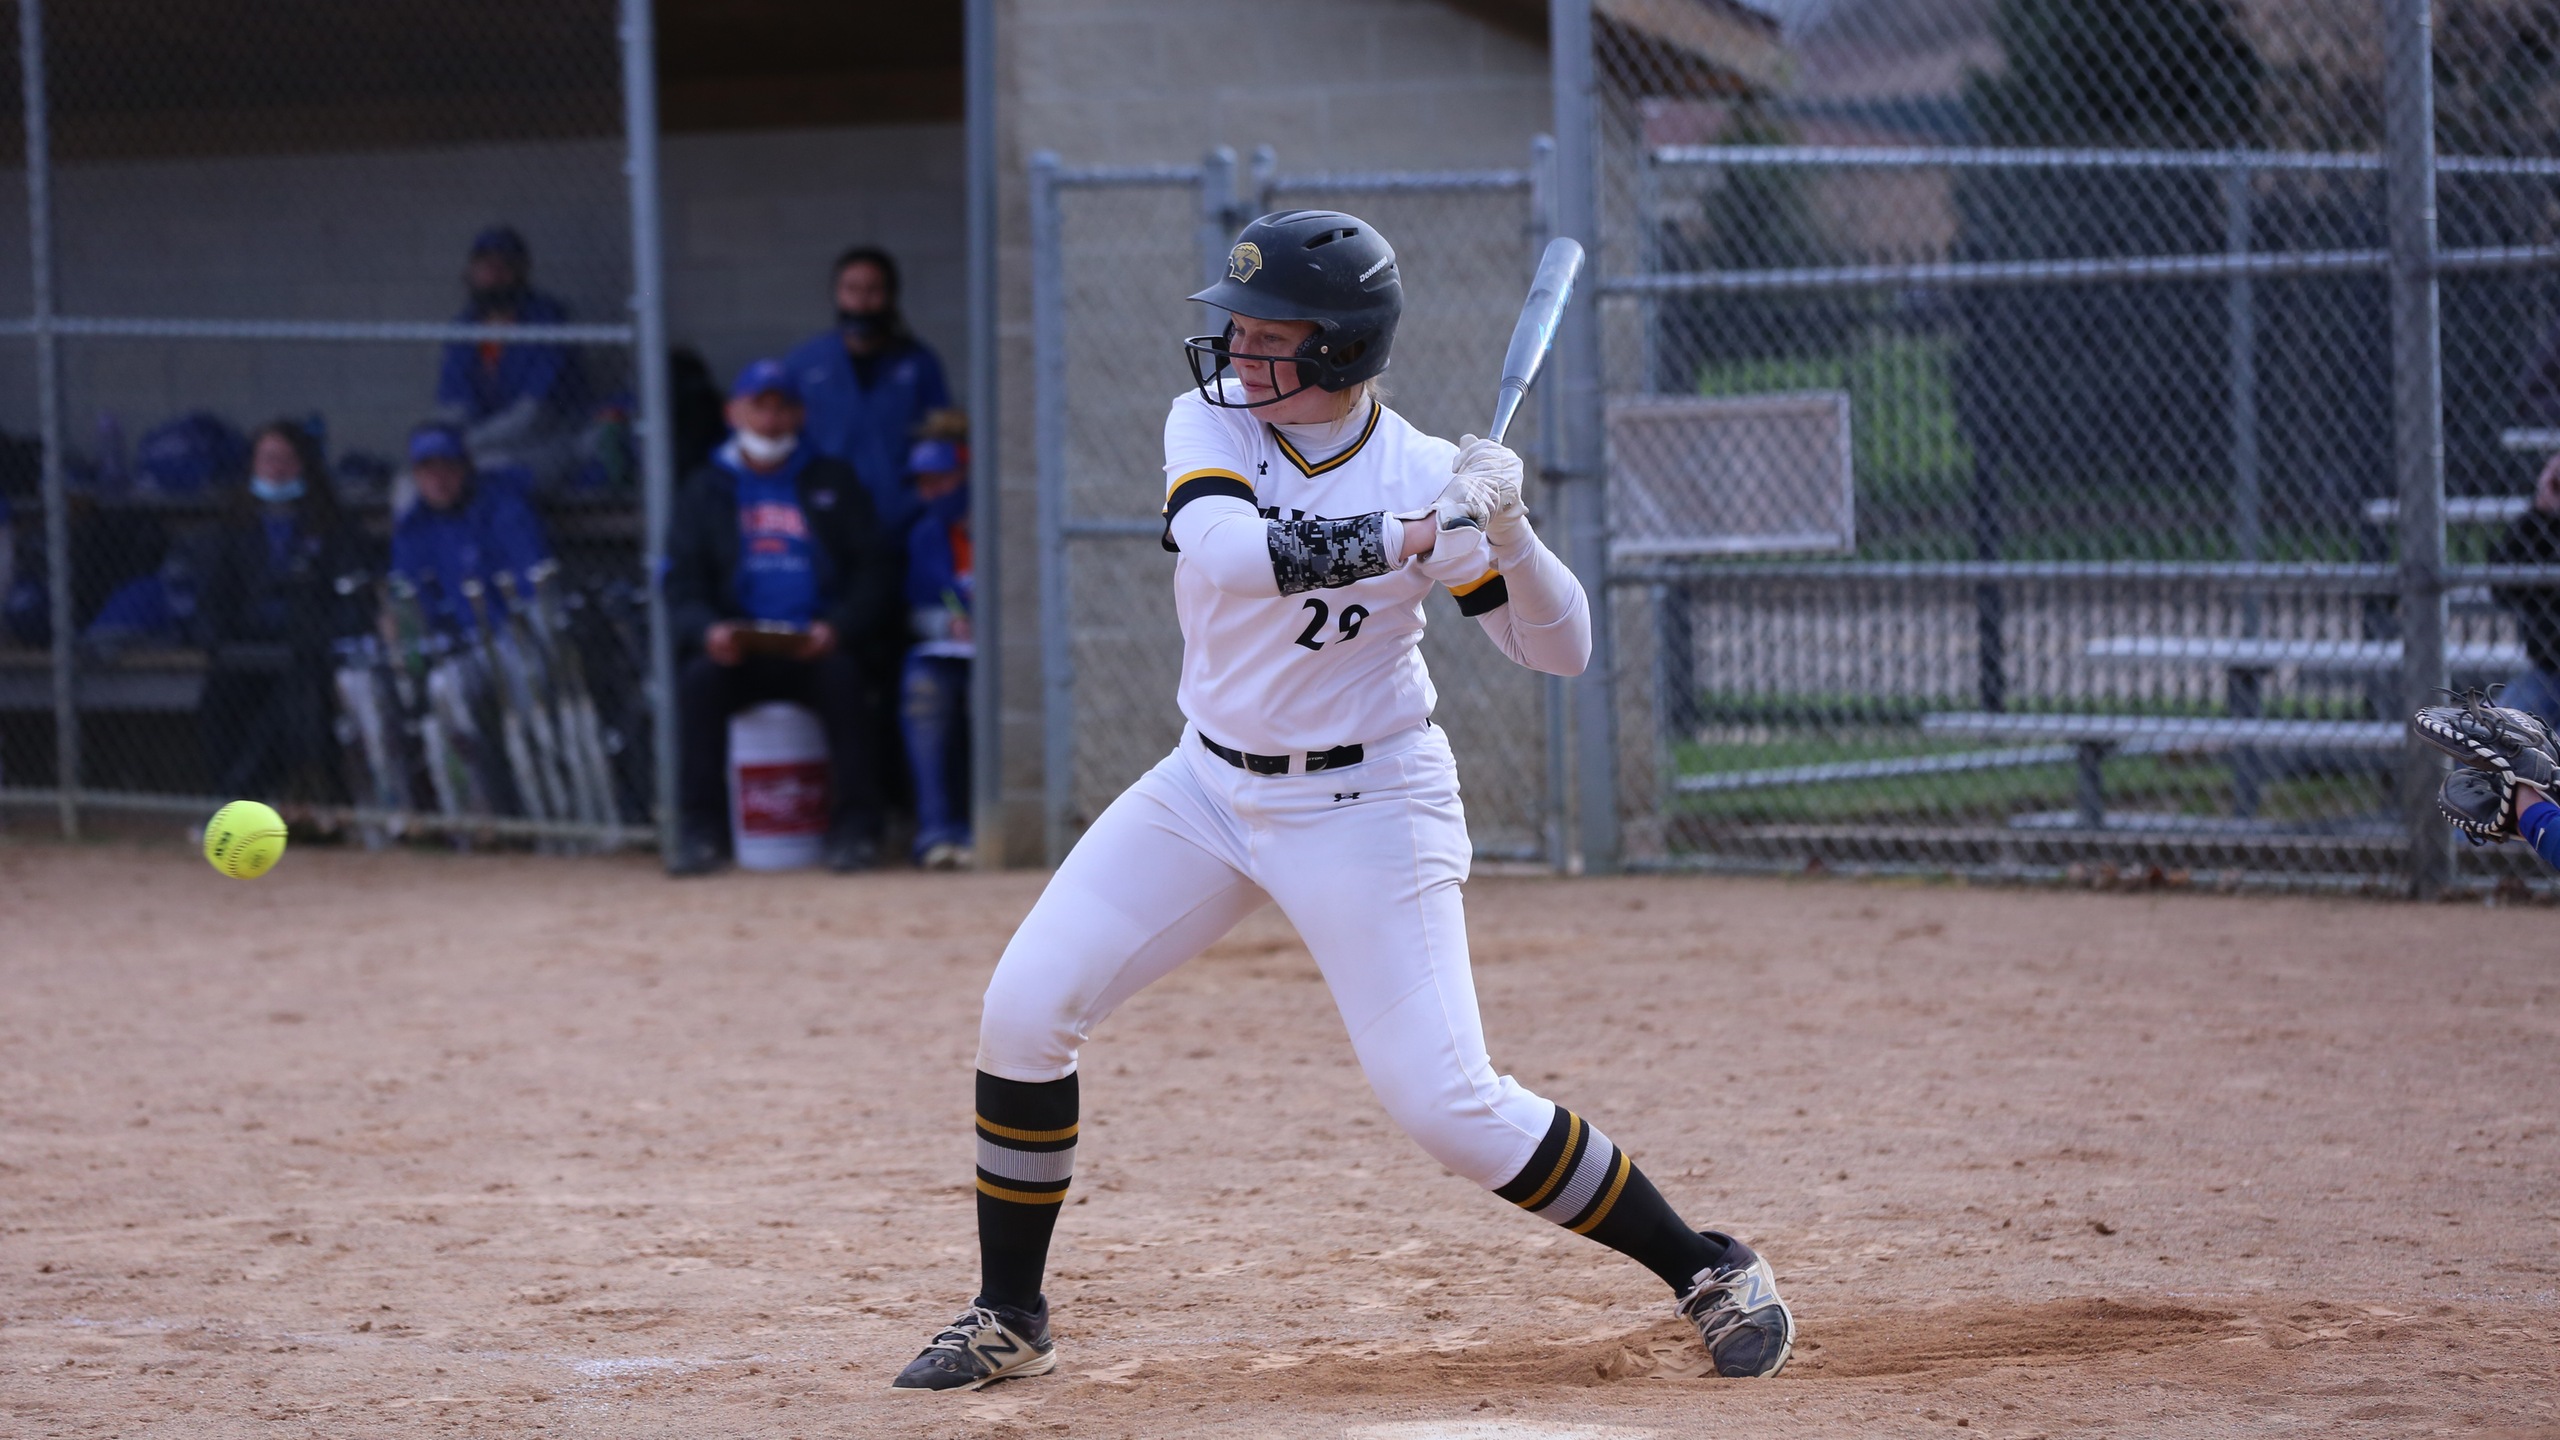 Hannah Ritter went 6-for-8 against the Pioneers with two runs batted in.